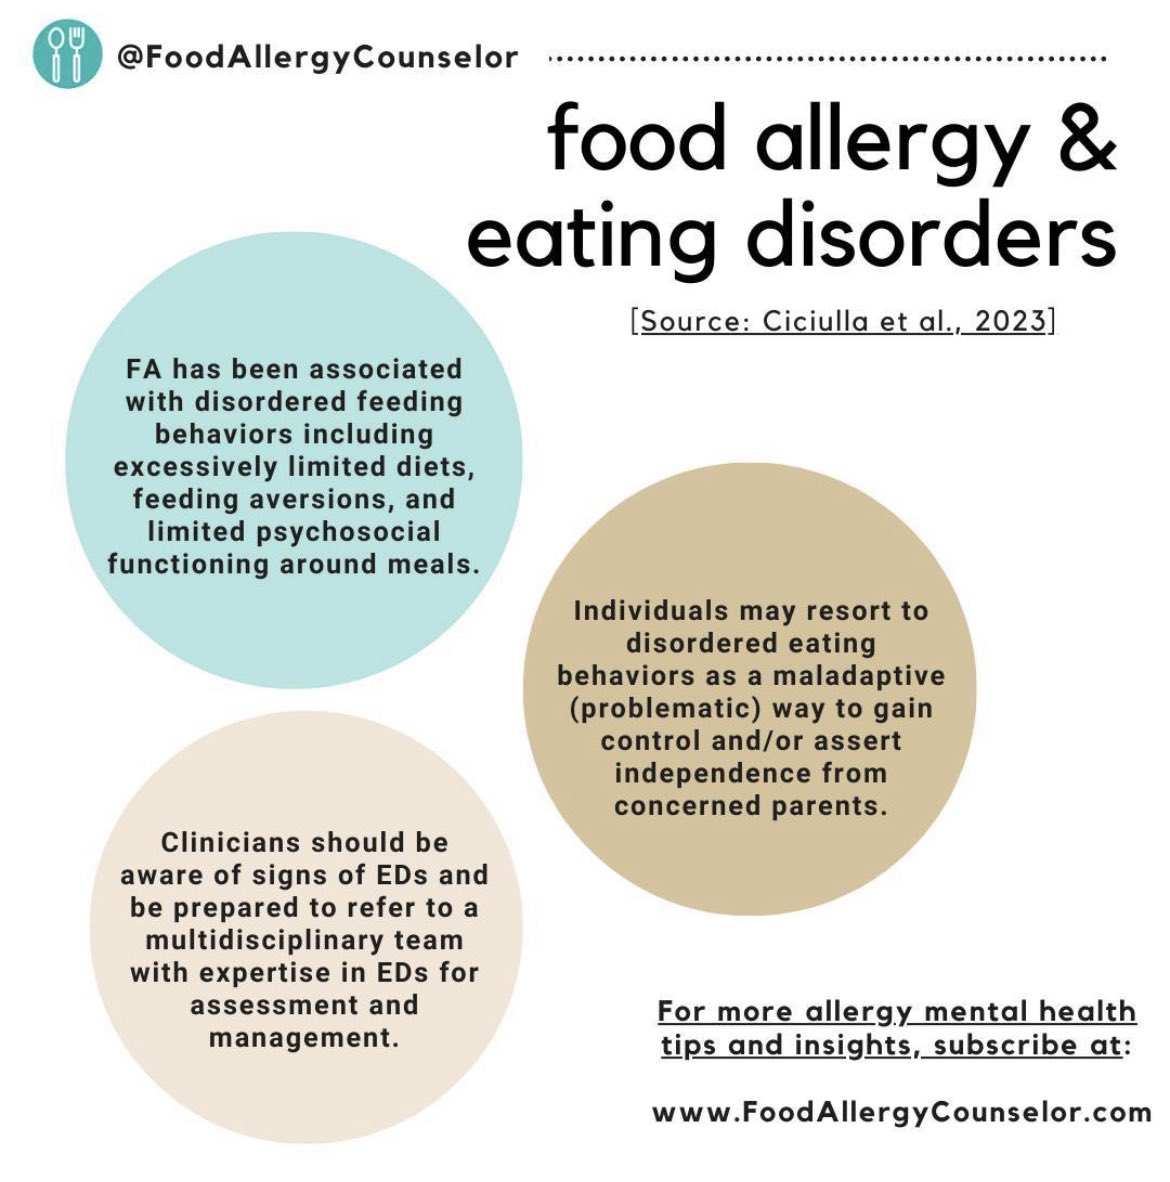 Last week's Food Allergy Counselor Corner email looked at data from a 2023 review of available food allergy and eating disorder behavior. Did you read it? (Cc: @DanielaCiciulla) foodallergycounselor.ck.page/profile #FoodAllergy #FoodAllergyCounselor #EatingDisorders #ARFID